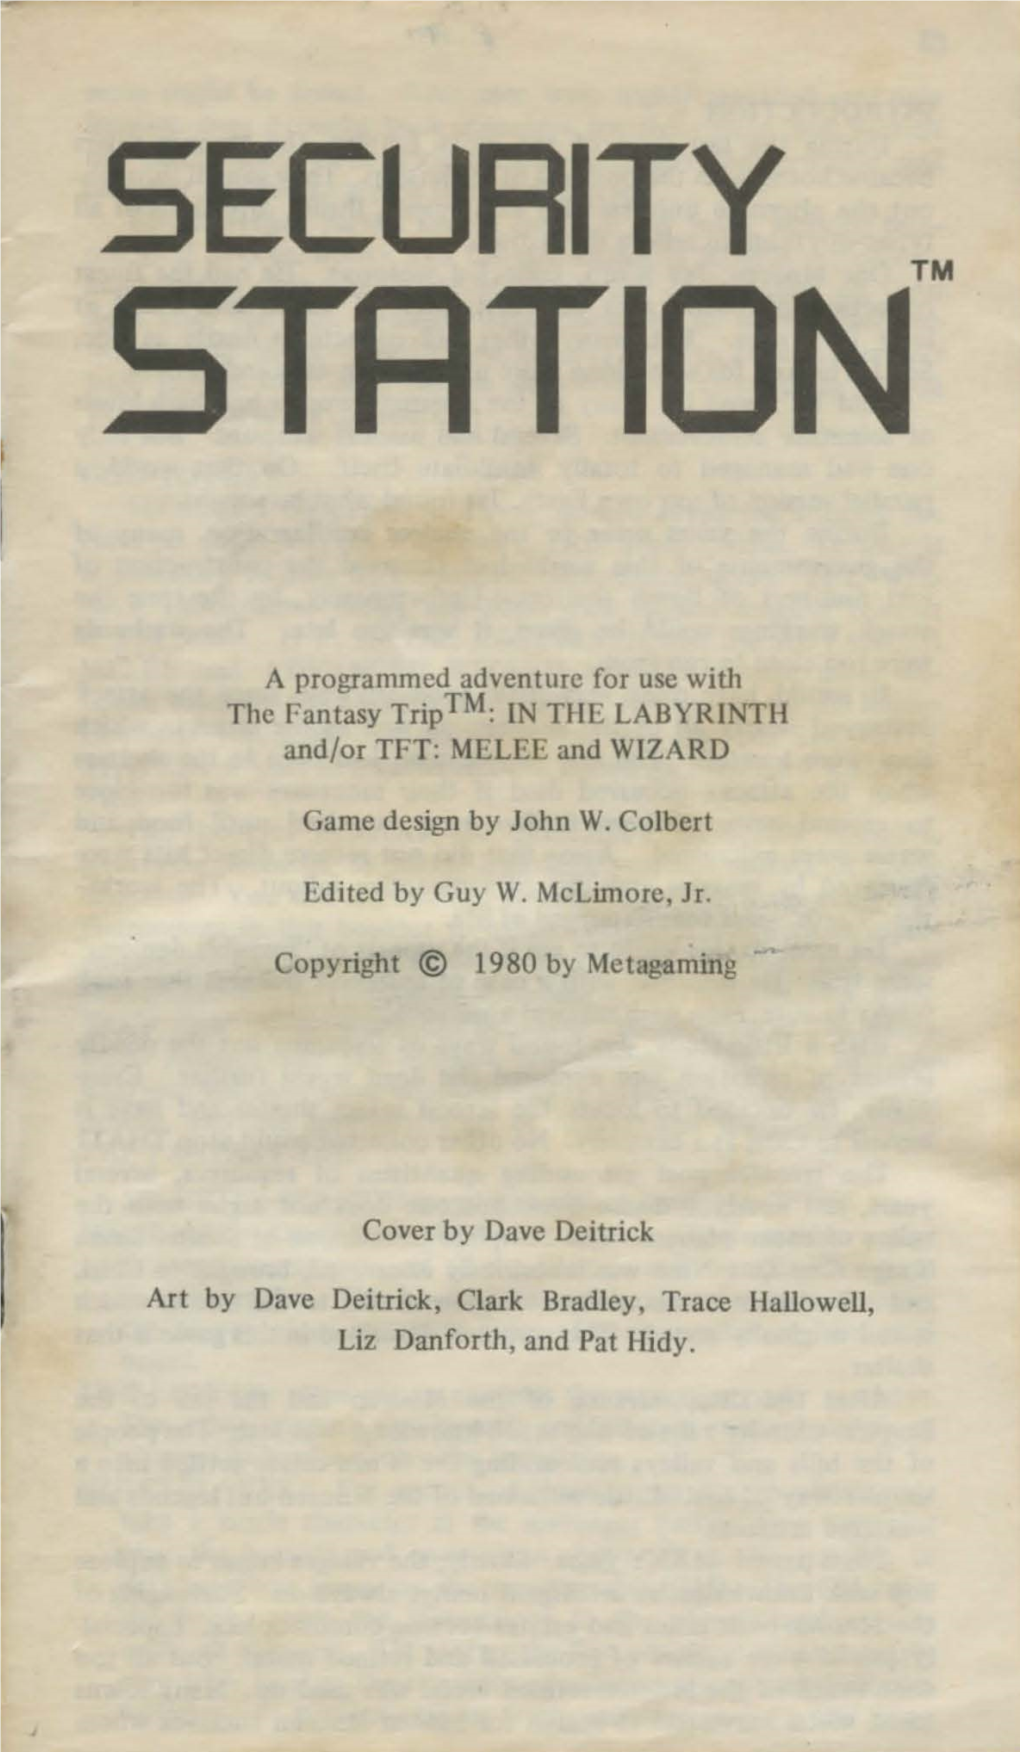 SECURITY STATION Is a Programmed Adventure Utilizing the During the Years Prior to the Nuclear Conflagration, M~Y of Rules Set Forth in the FANTASY TRIP Game System